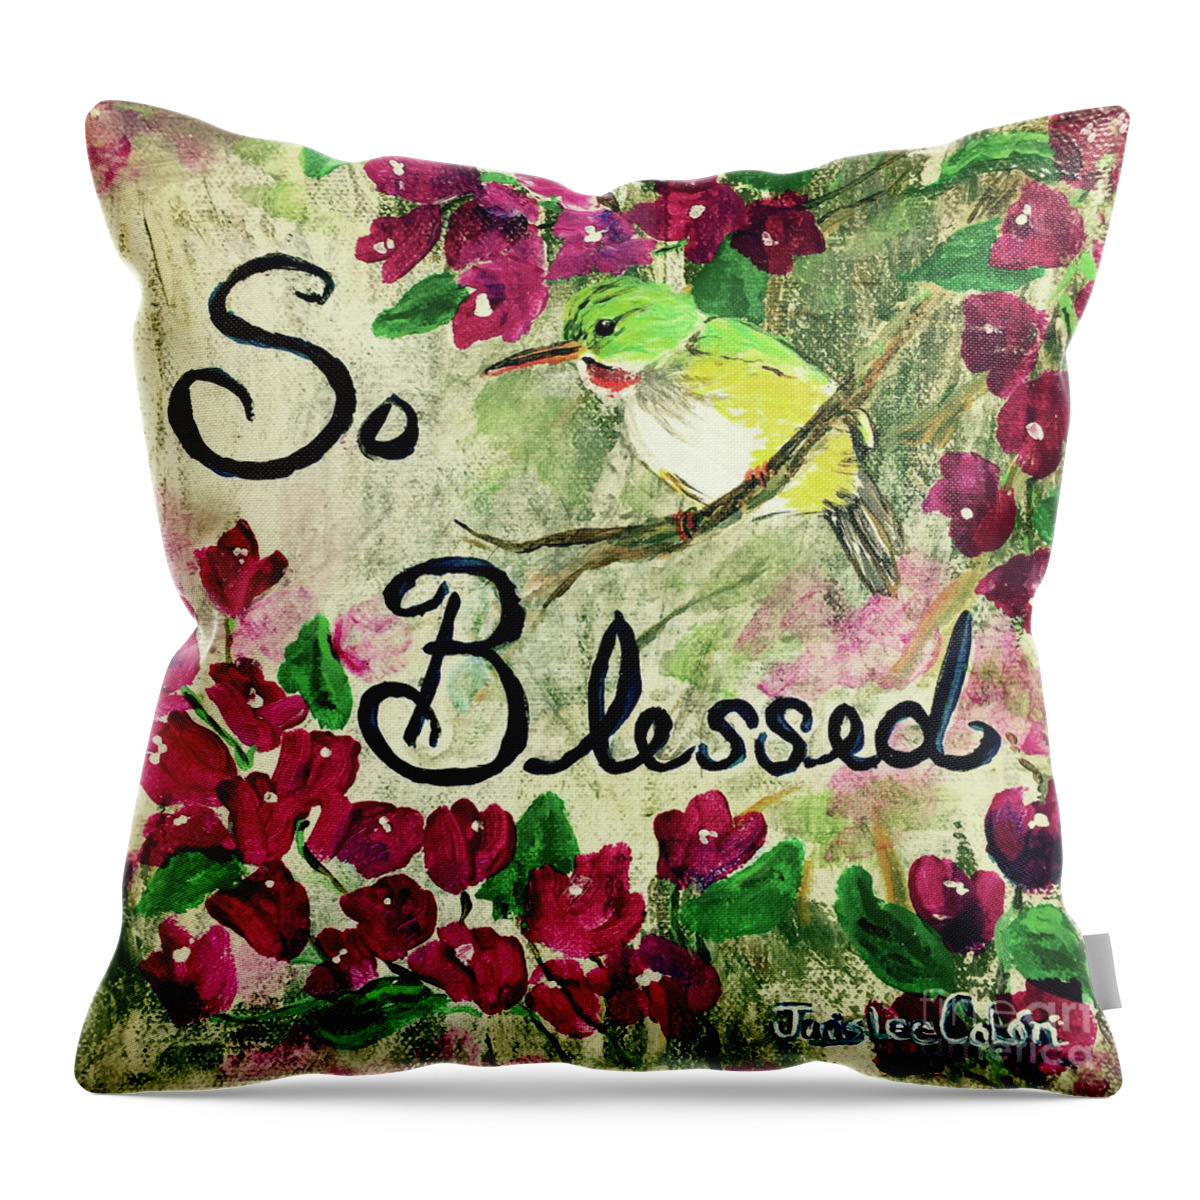 Cuban Tody Bird Throw Pillow featuring the painting So Blessed by Janis Lee Colon